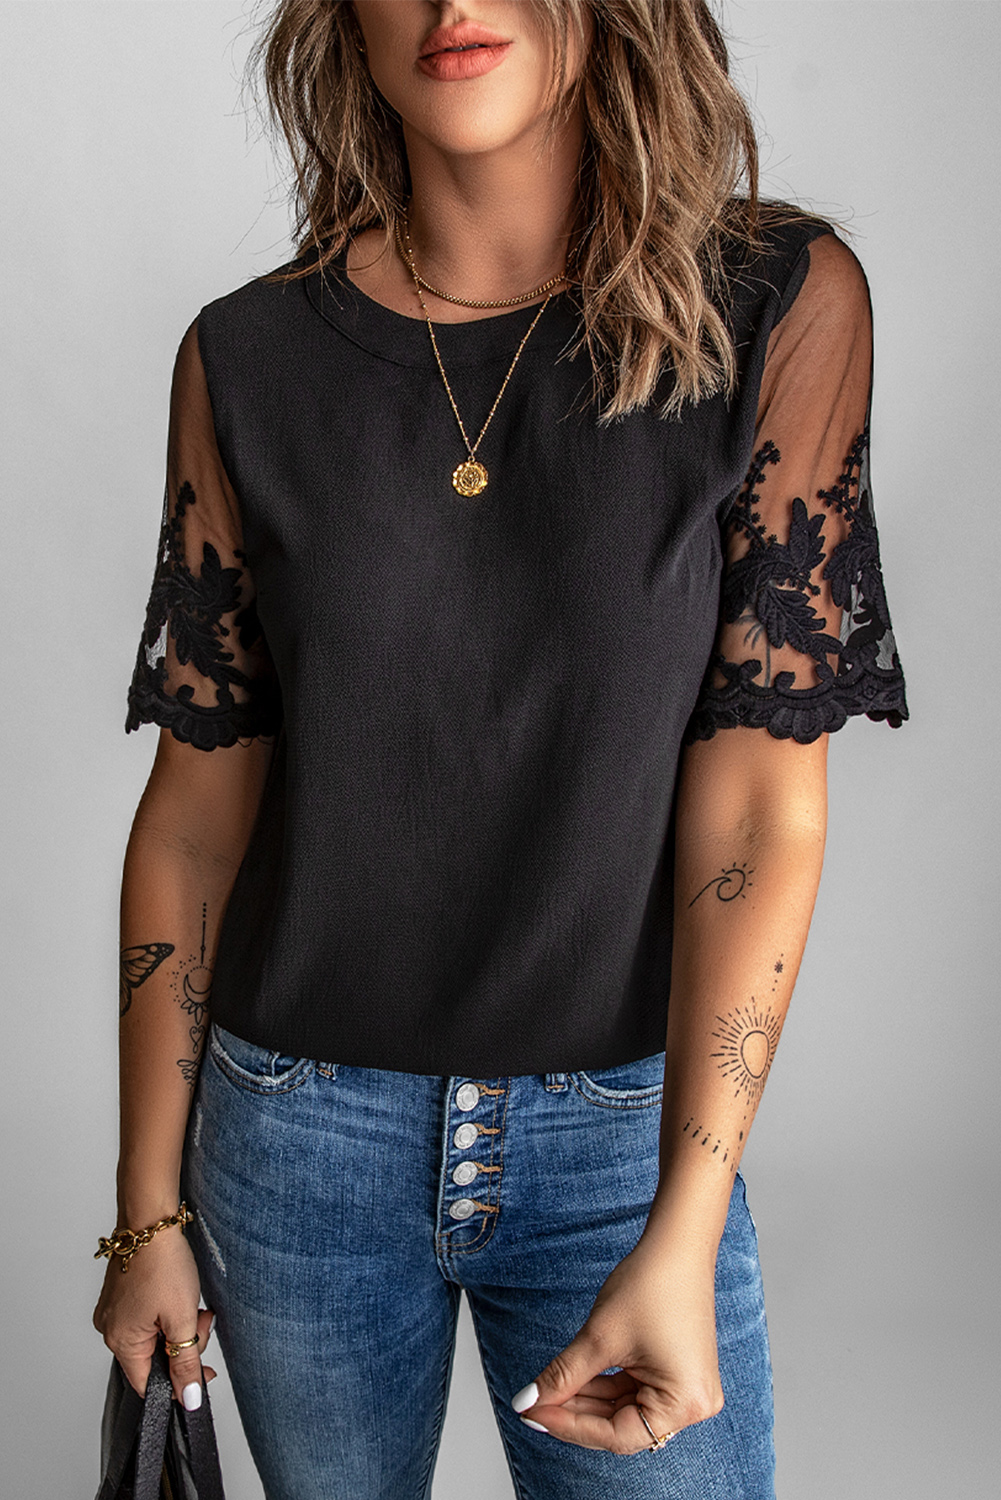 Dropshipping Black Sheer FLOWER Lace Short Sleeve Summer Top